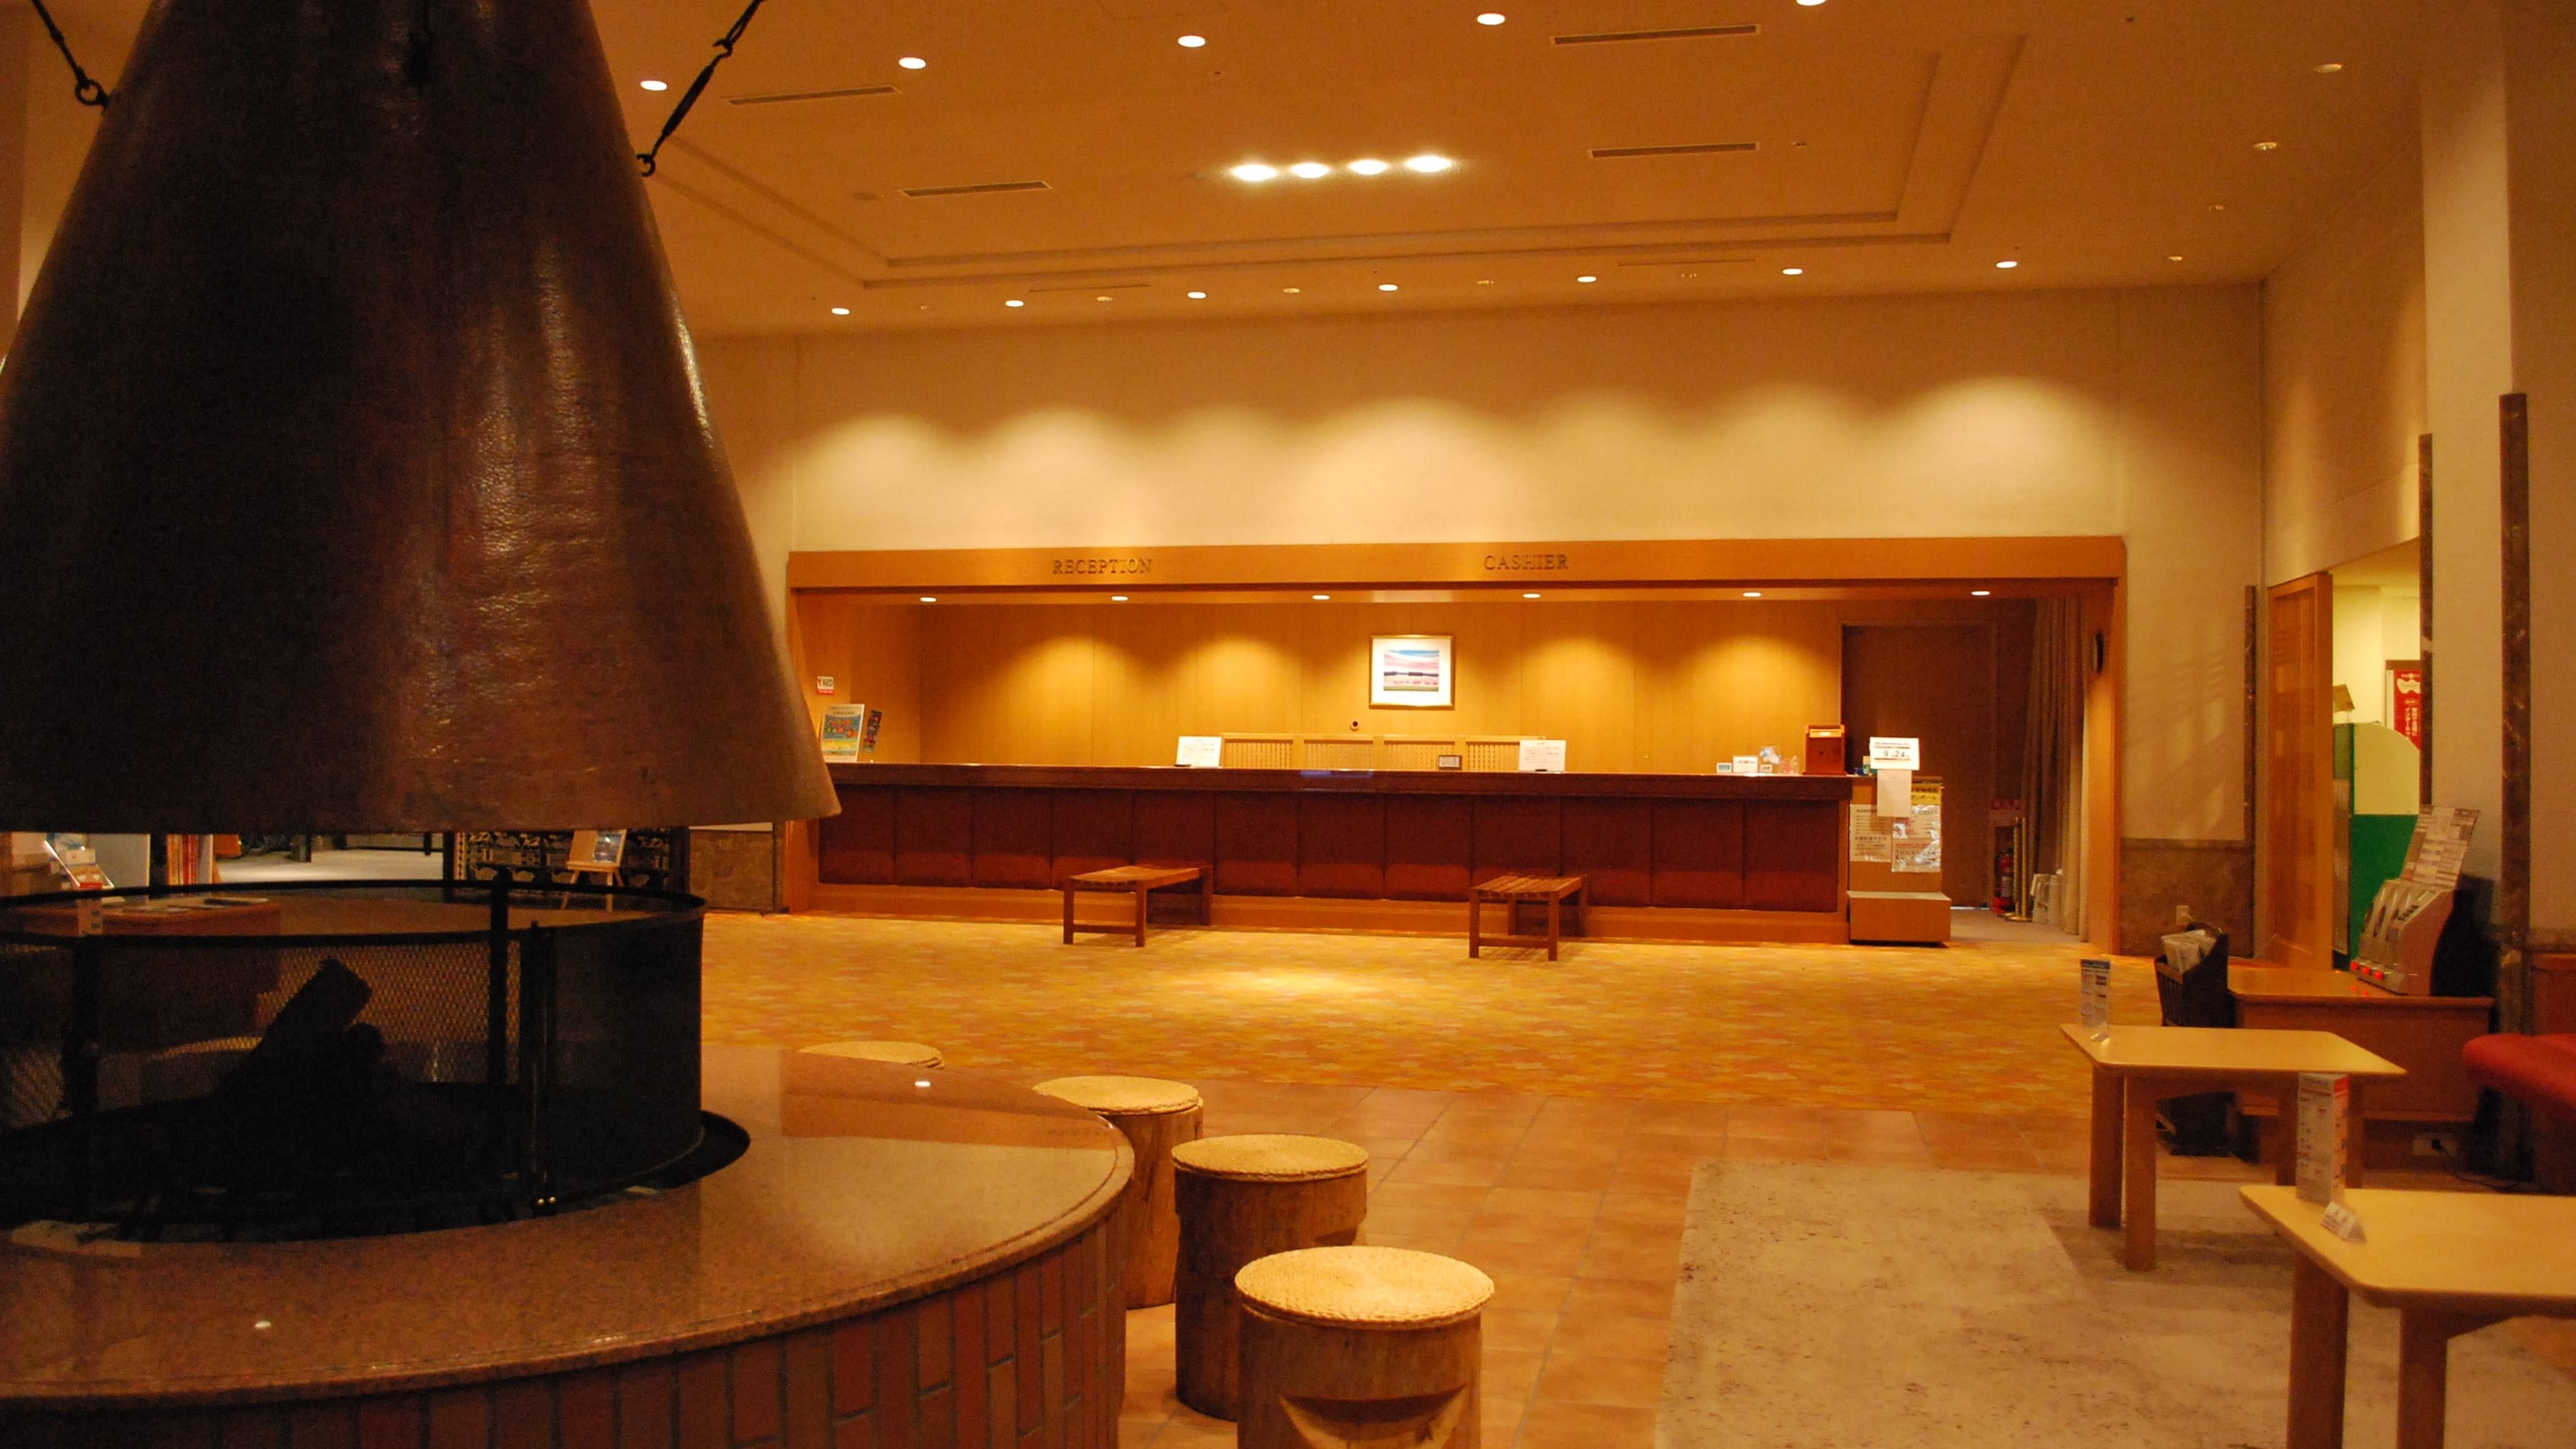 1st floor lobby: In winter, the fireplace is lit to warmly welcome everyone.